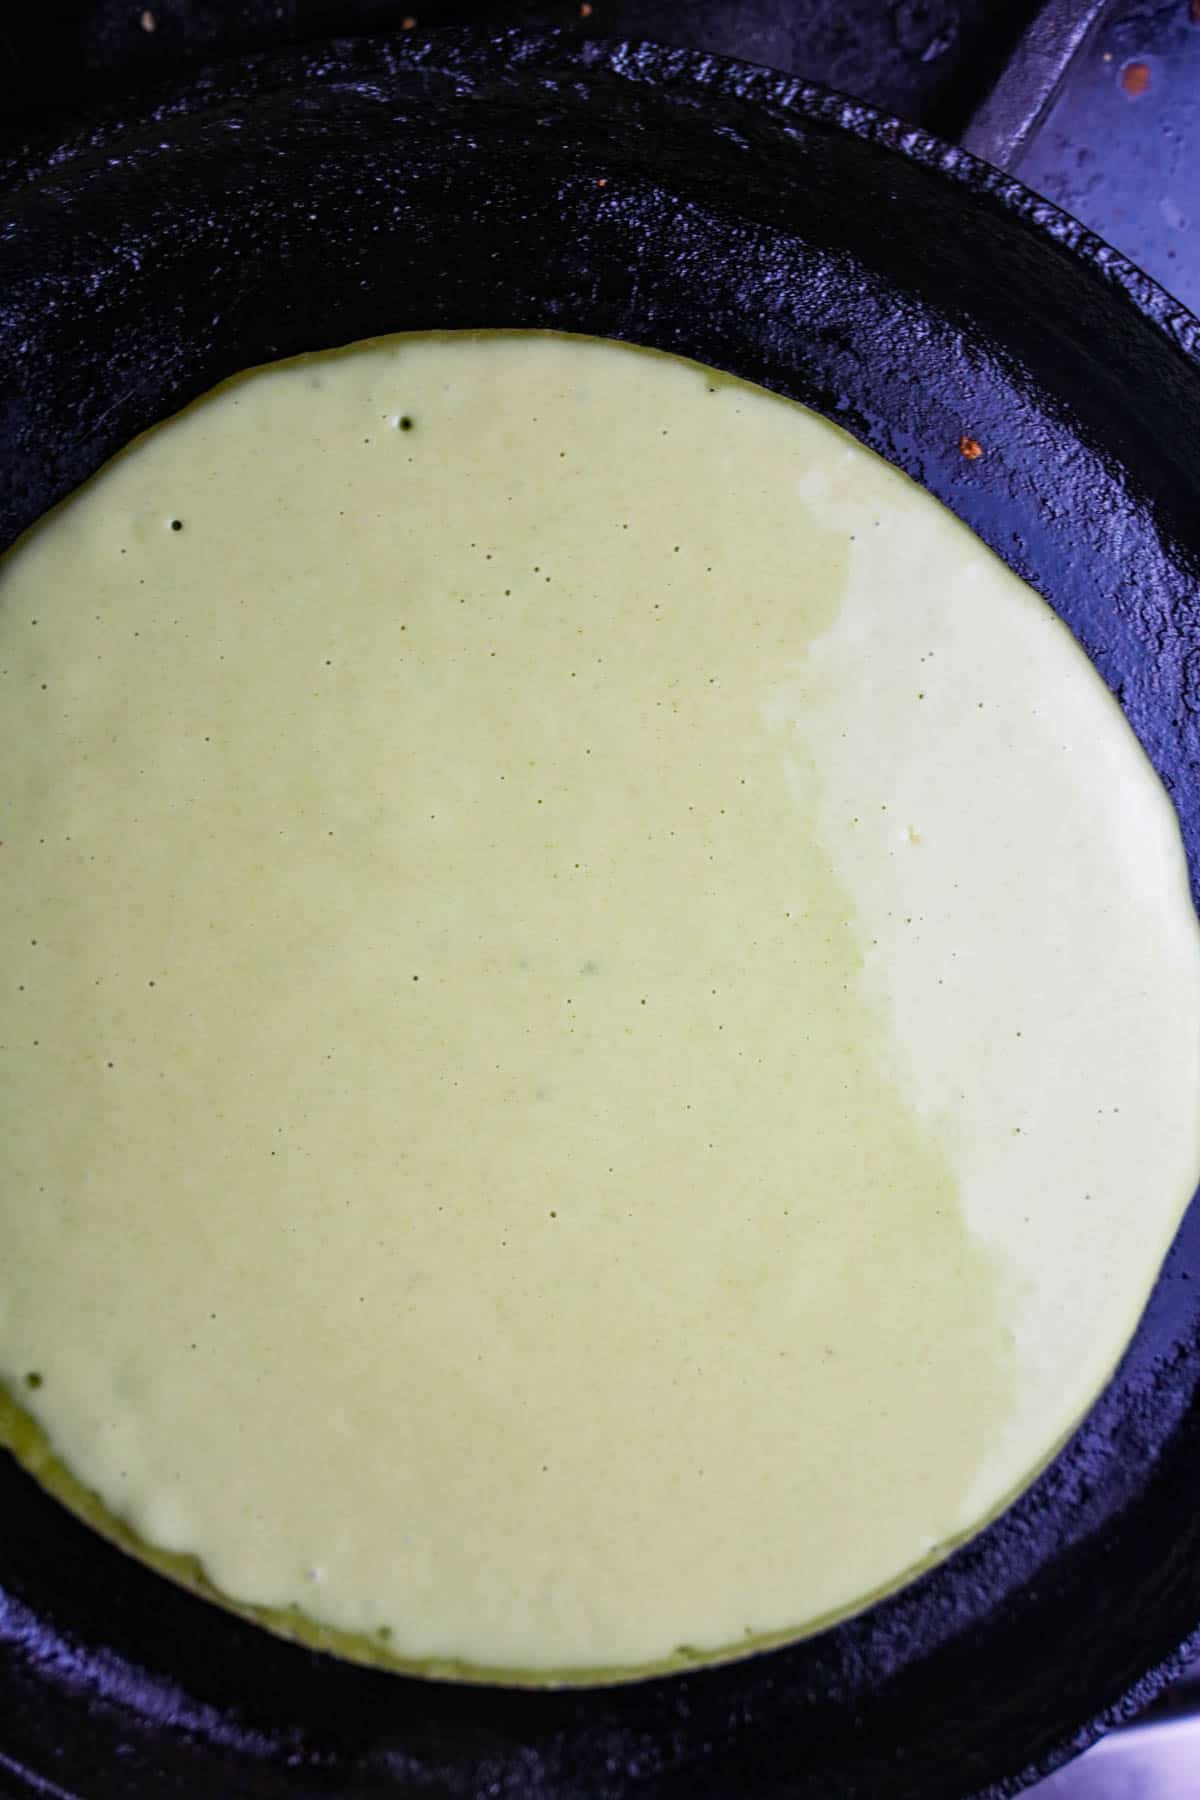 a skillet with a green batter cooking in it.